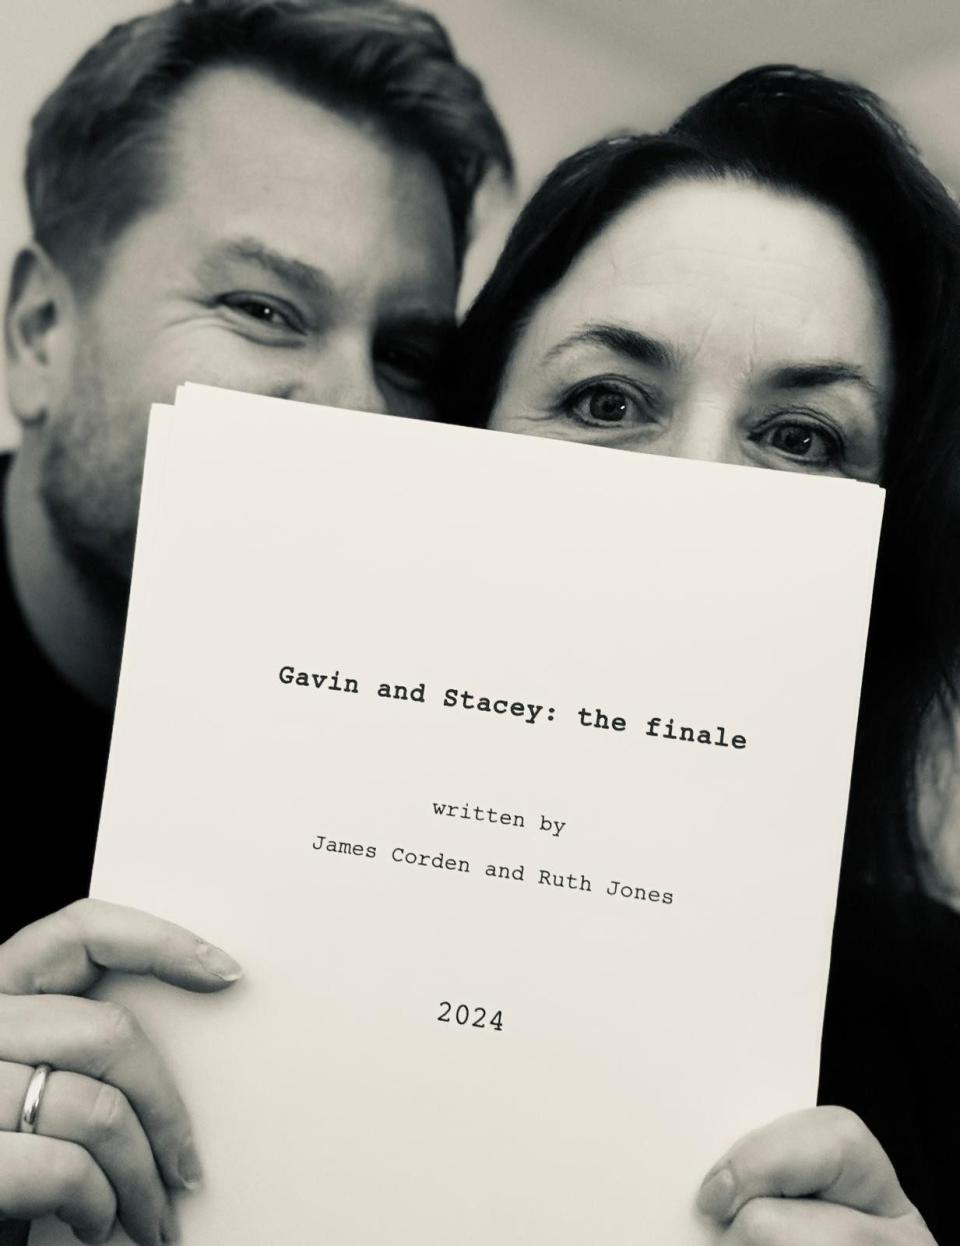 James Corden and Ruth Jones holding a script for 'Gavin and Stacey: The Finale'